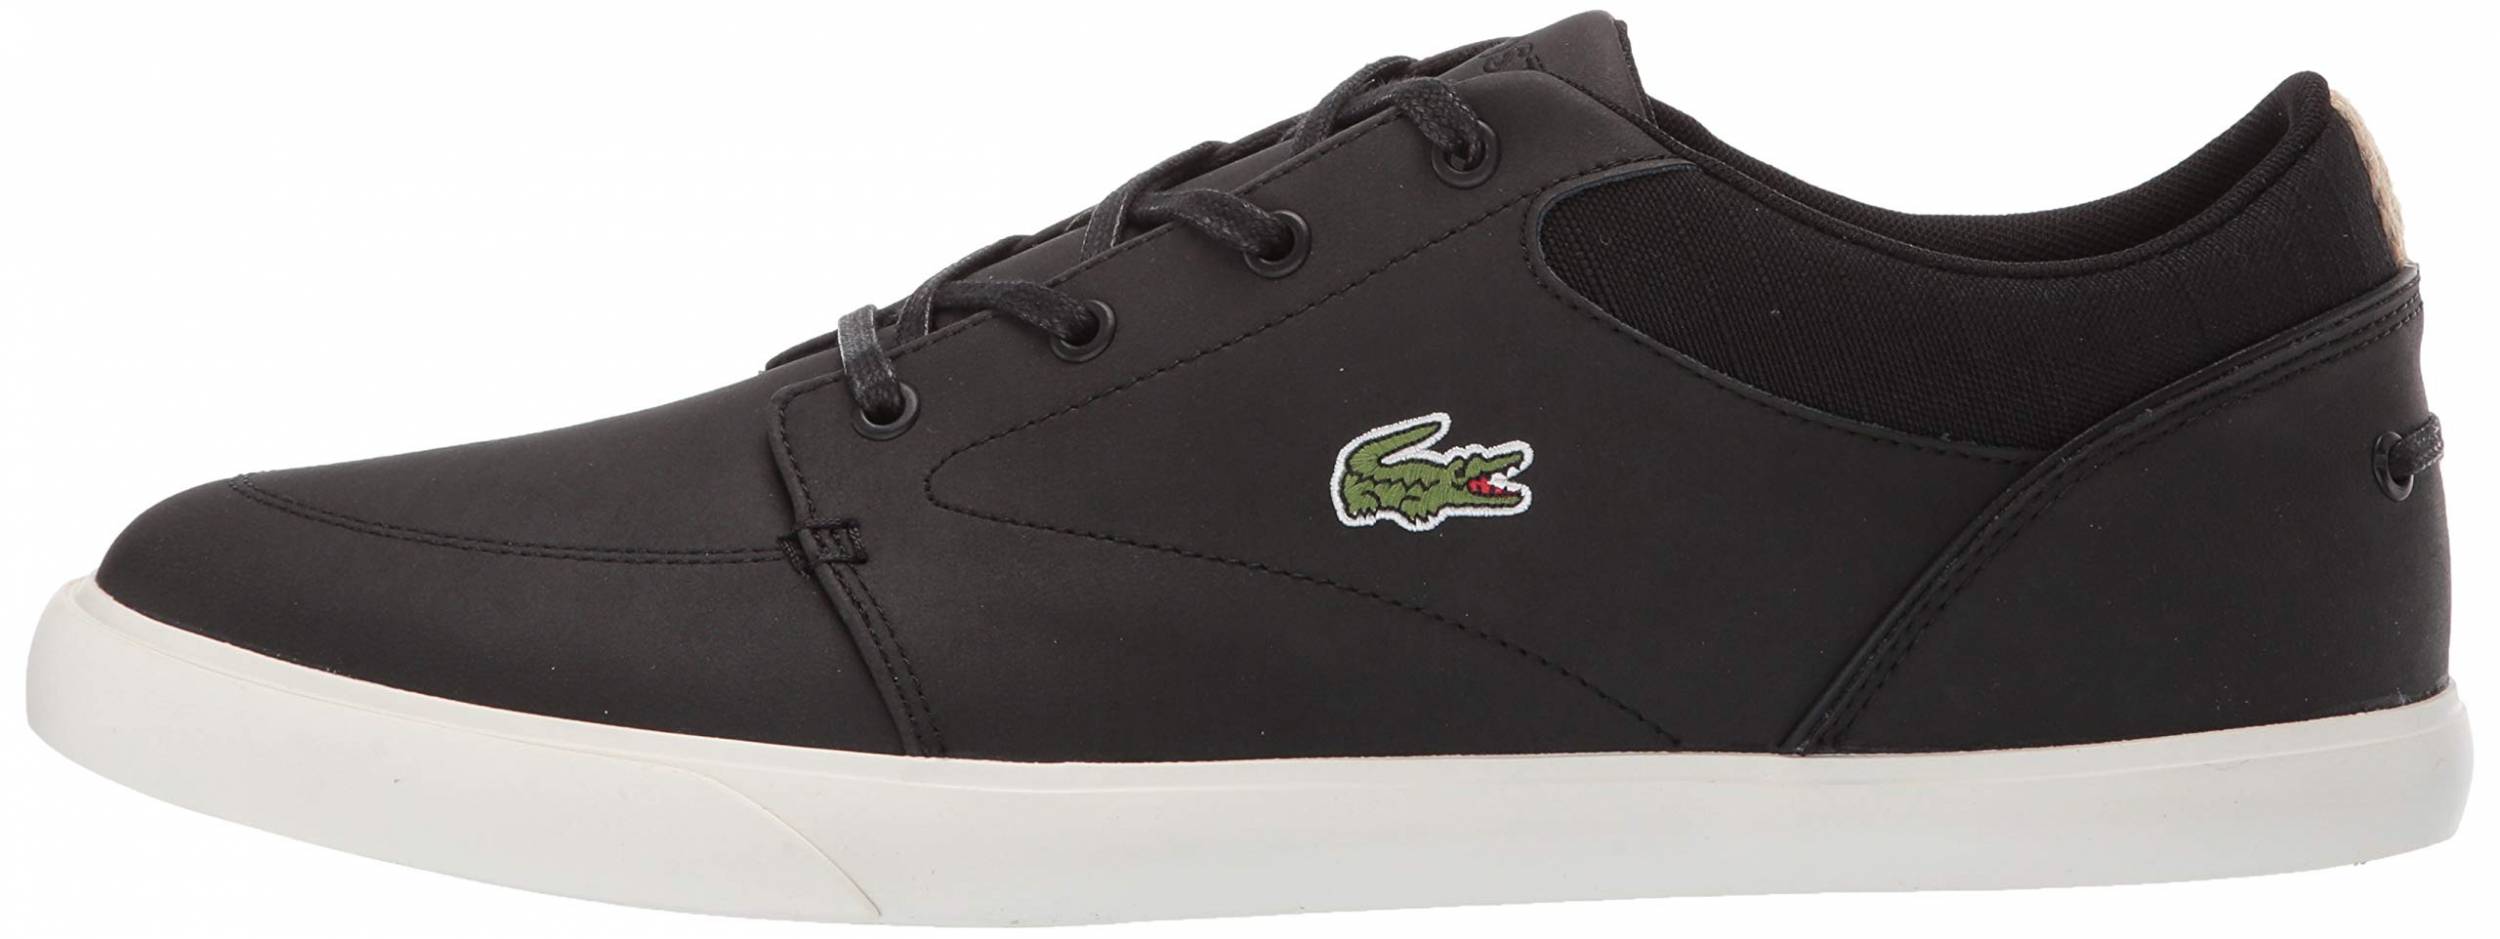 latest lacoste sneakers 219